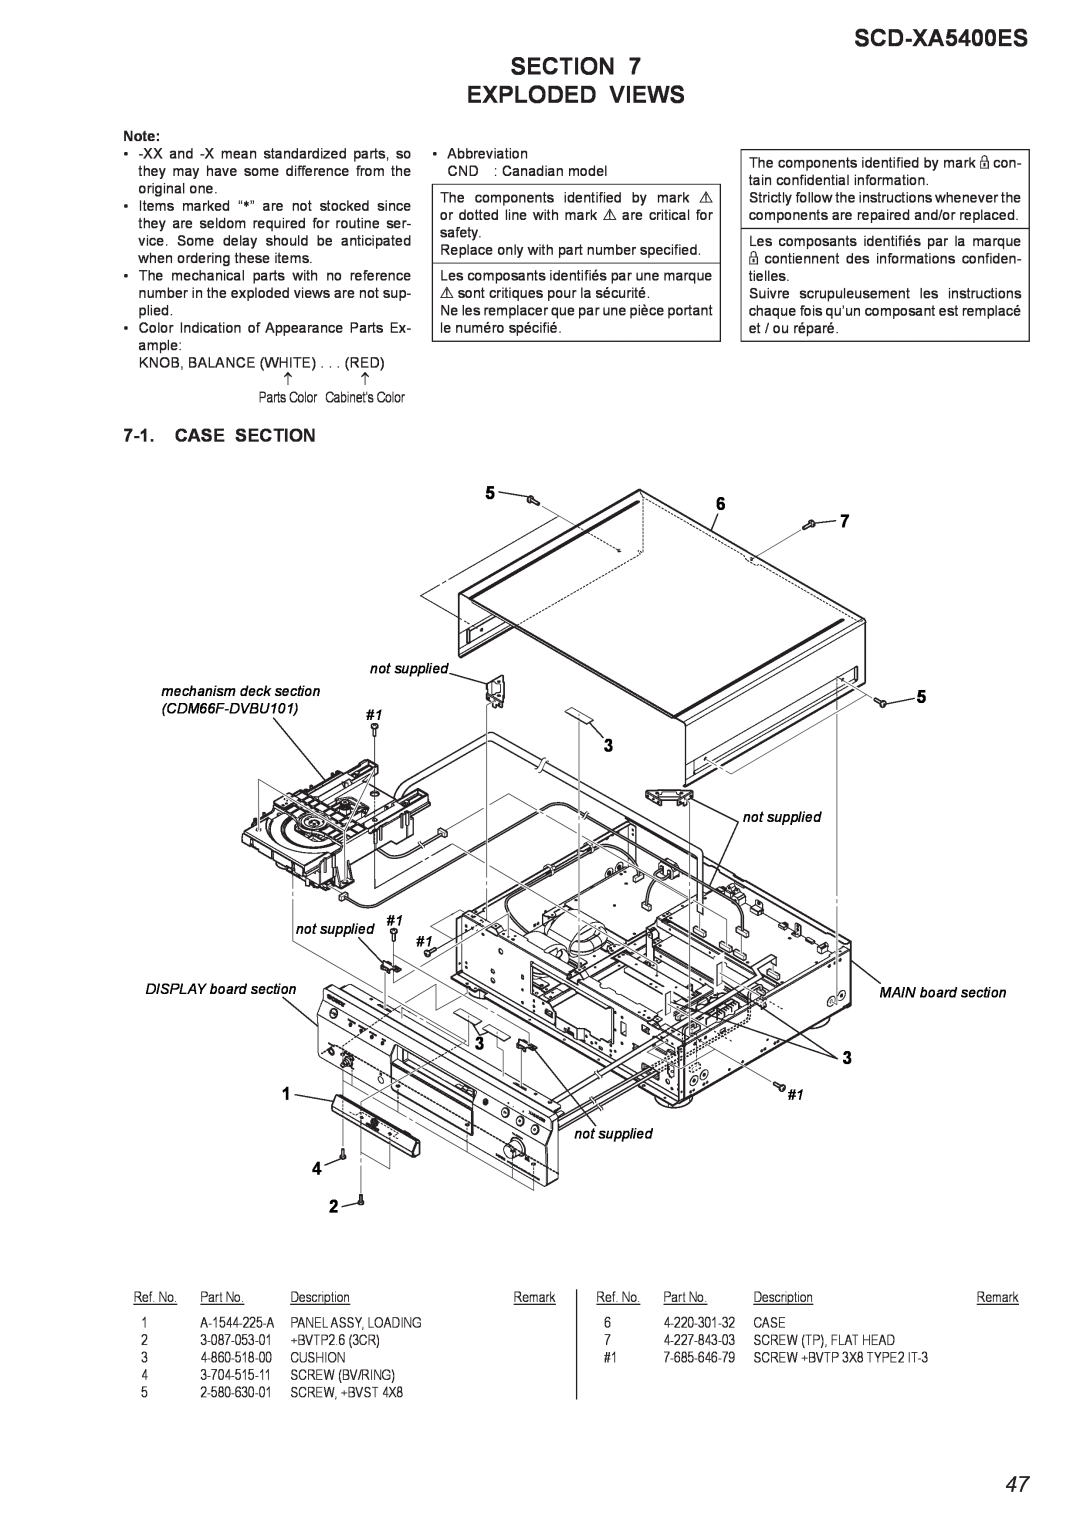 Sony 2008H05-1 service manual Section Exploded Views, SCD-XA5400ES, Case Section 